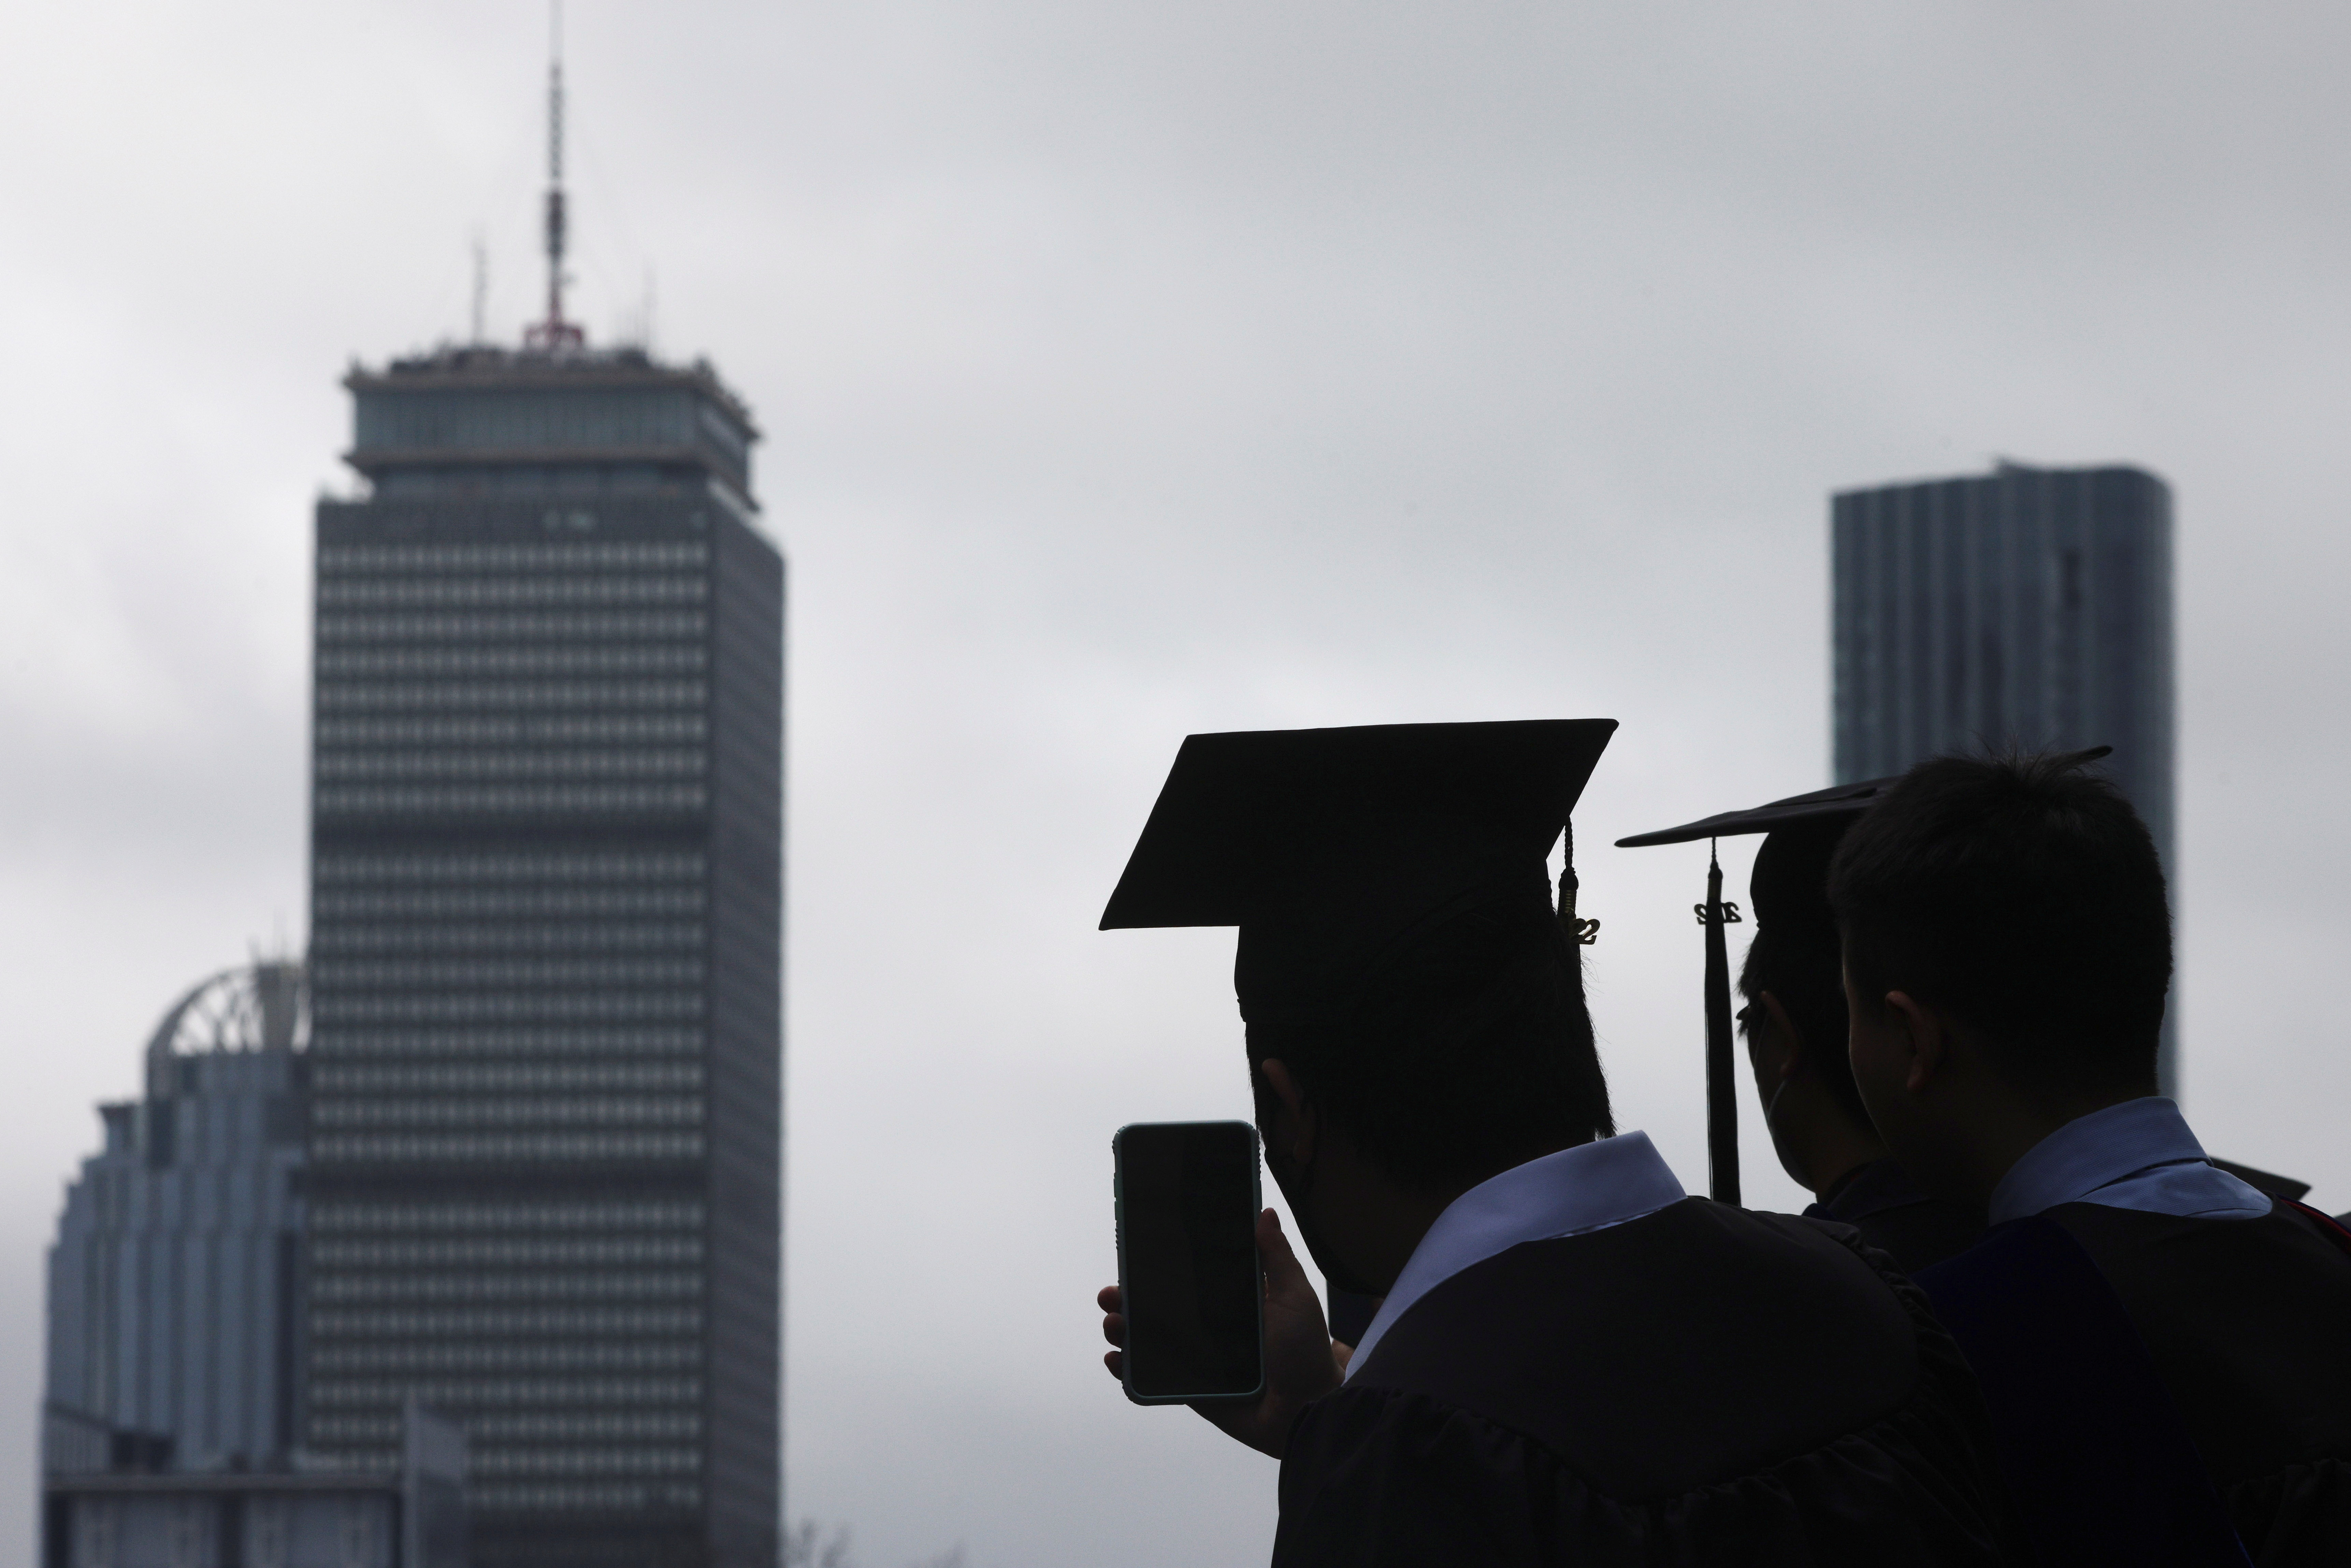 MIT holds its Commencement in Cambridge